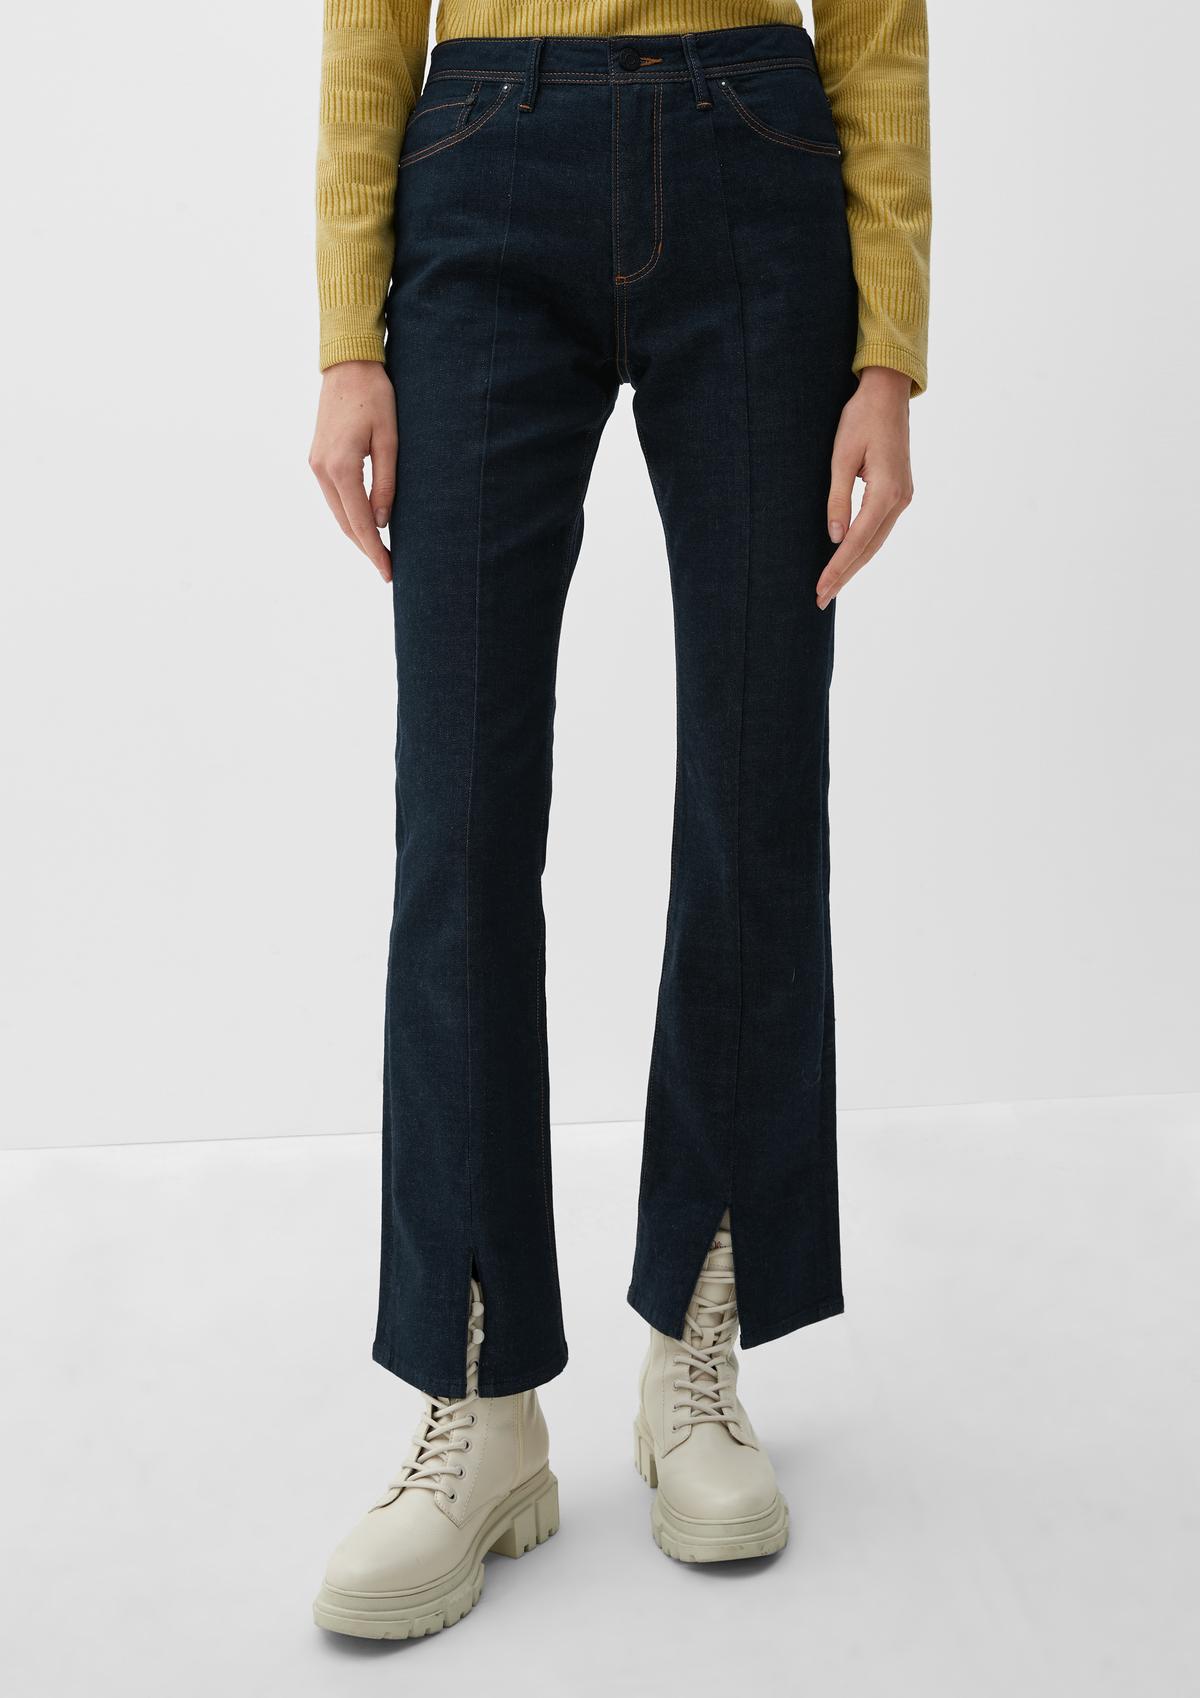 s.Oliver Jeans Beverly / Slim Fit / High Rise / Bootcut Leg 